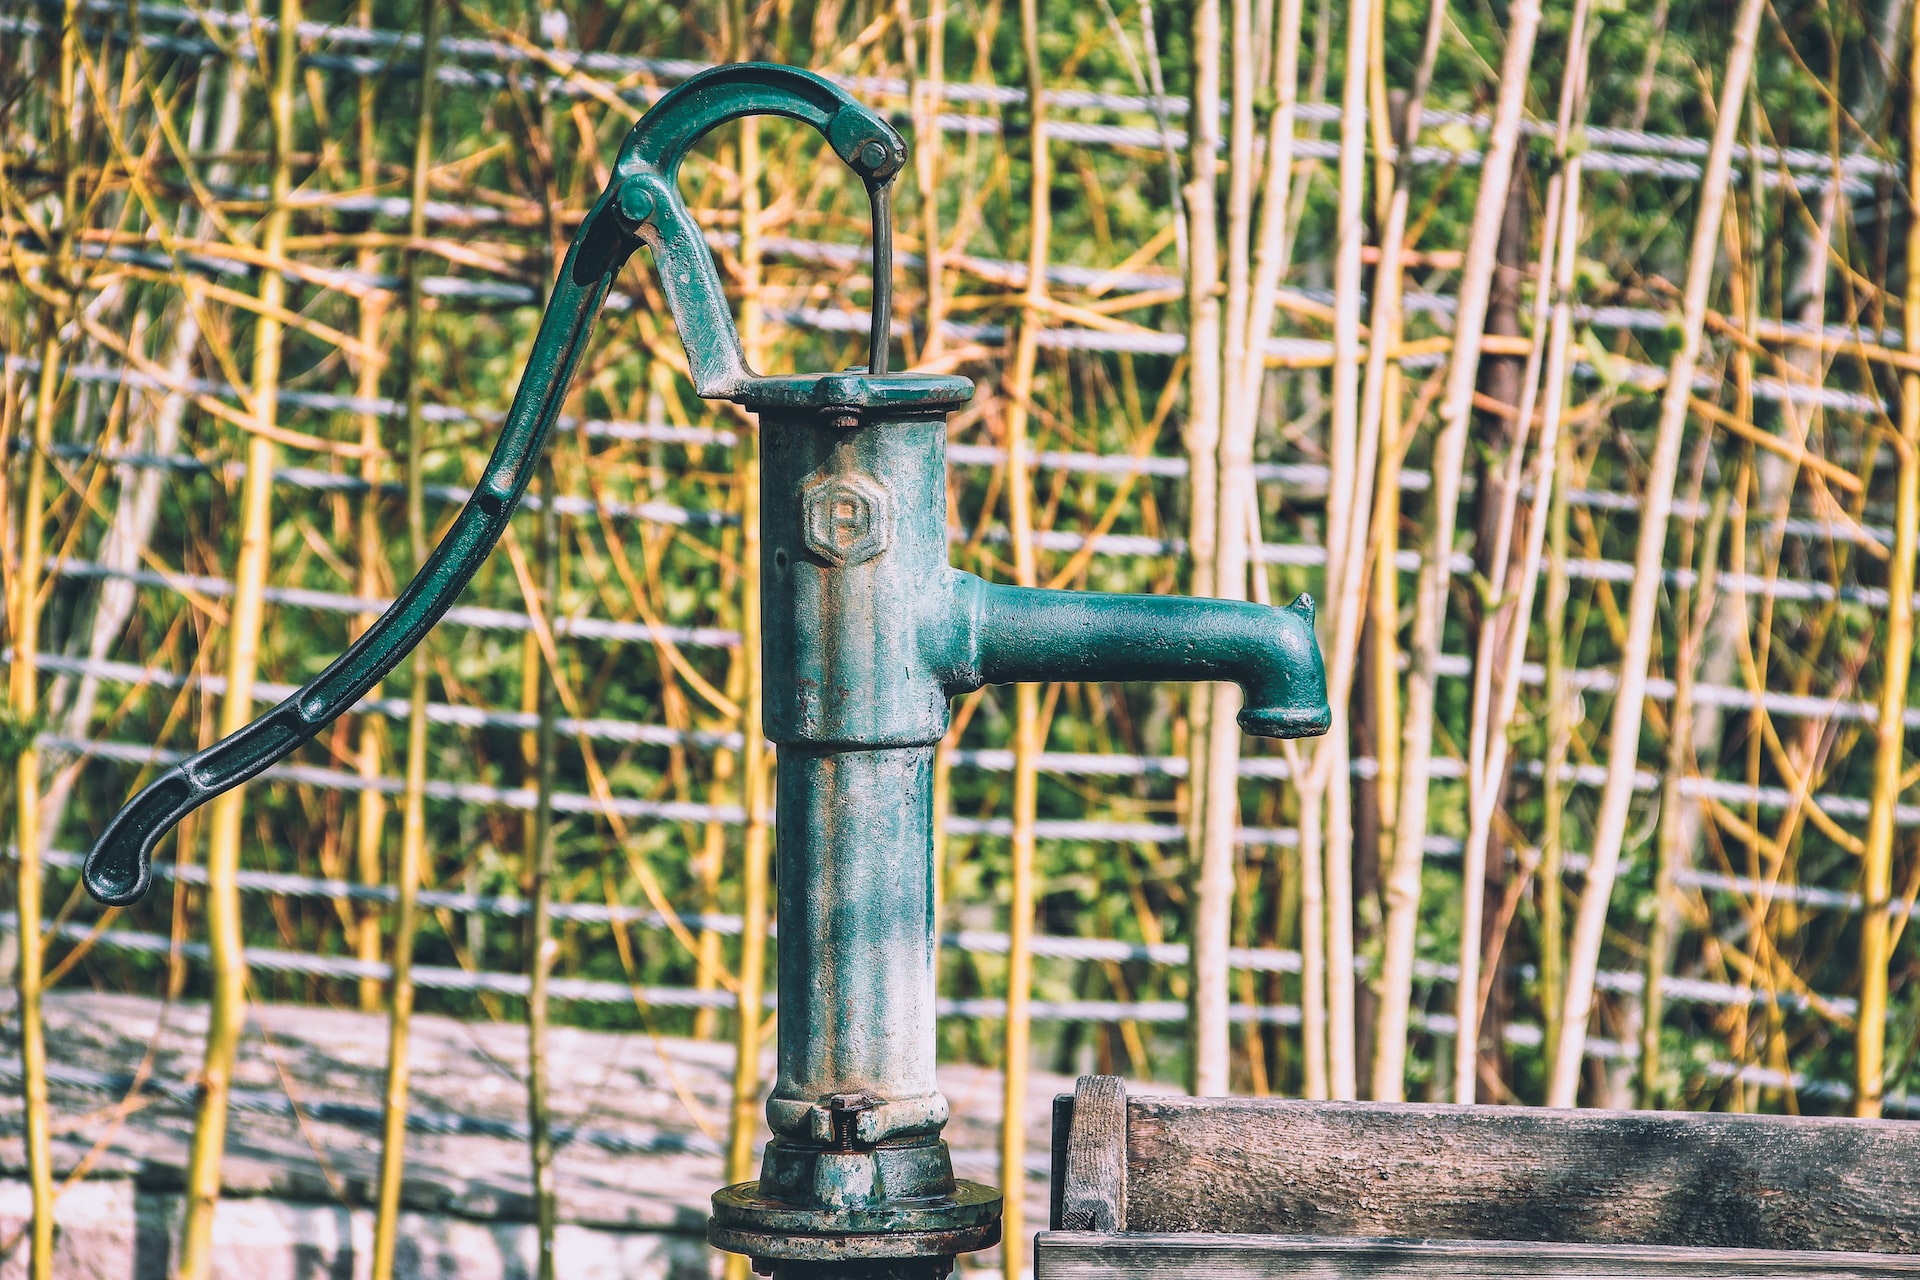 What are solar powered water pumps?